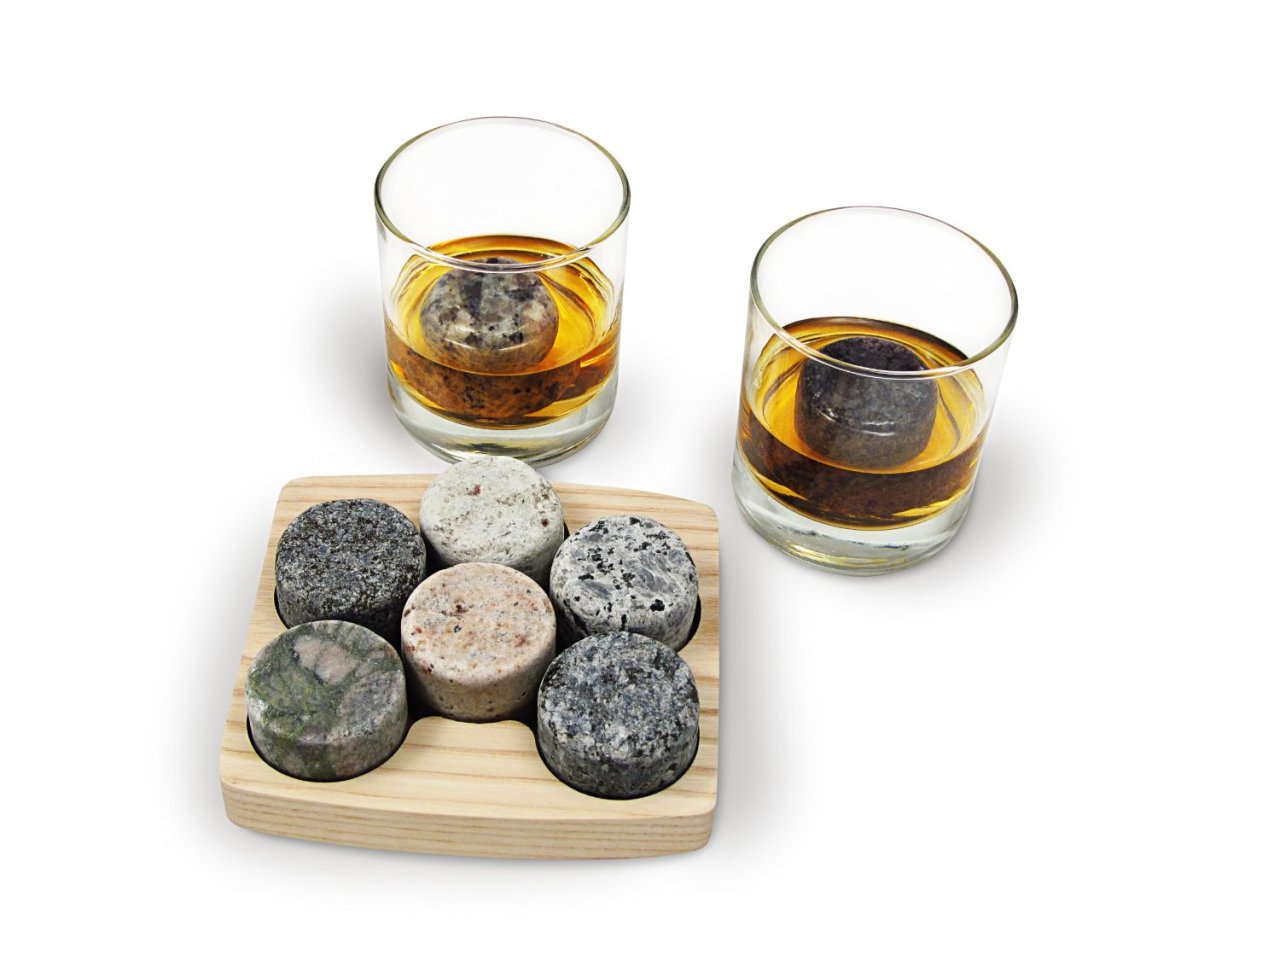 Sea Stones On The Rocks
On The Rocks chills whiskies and other fine liquors to their ideal drinking temperature (about 59-Degree F) without adding unwanted taste or diluting the drink. The solid granite stays cold, ensuring a smooth and leisurely drinking experience. Ice cubes can also change the taste and odor of a drink as they melt and dilute the spirit.